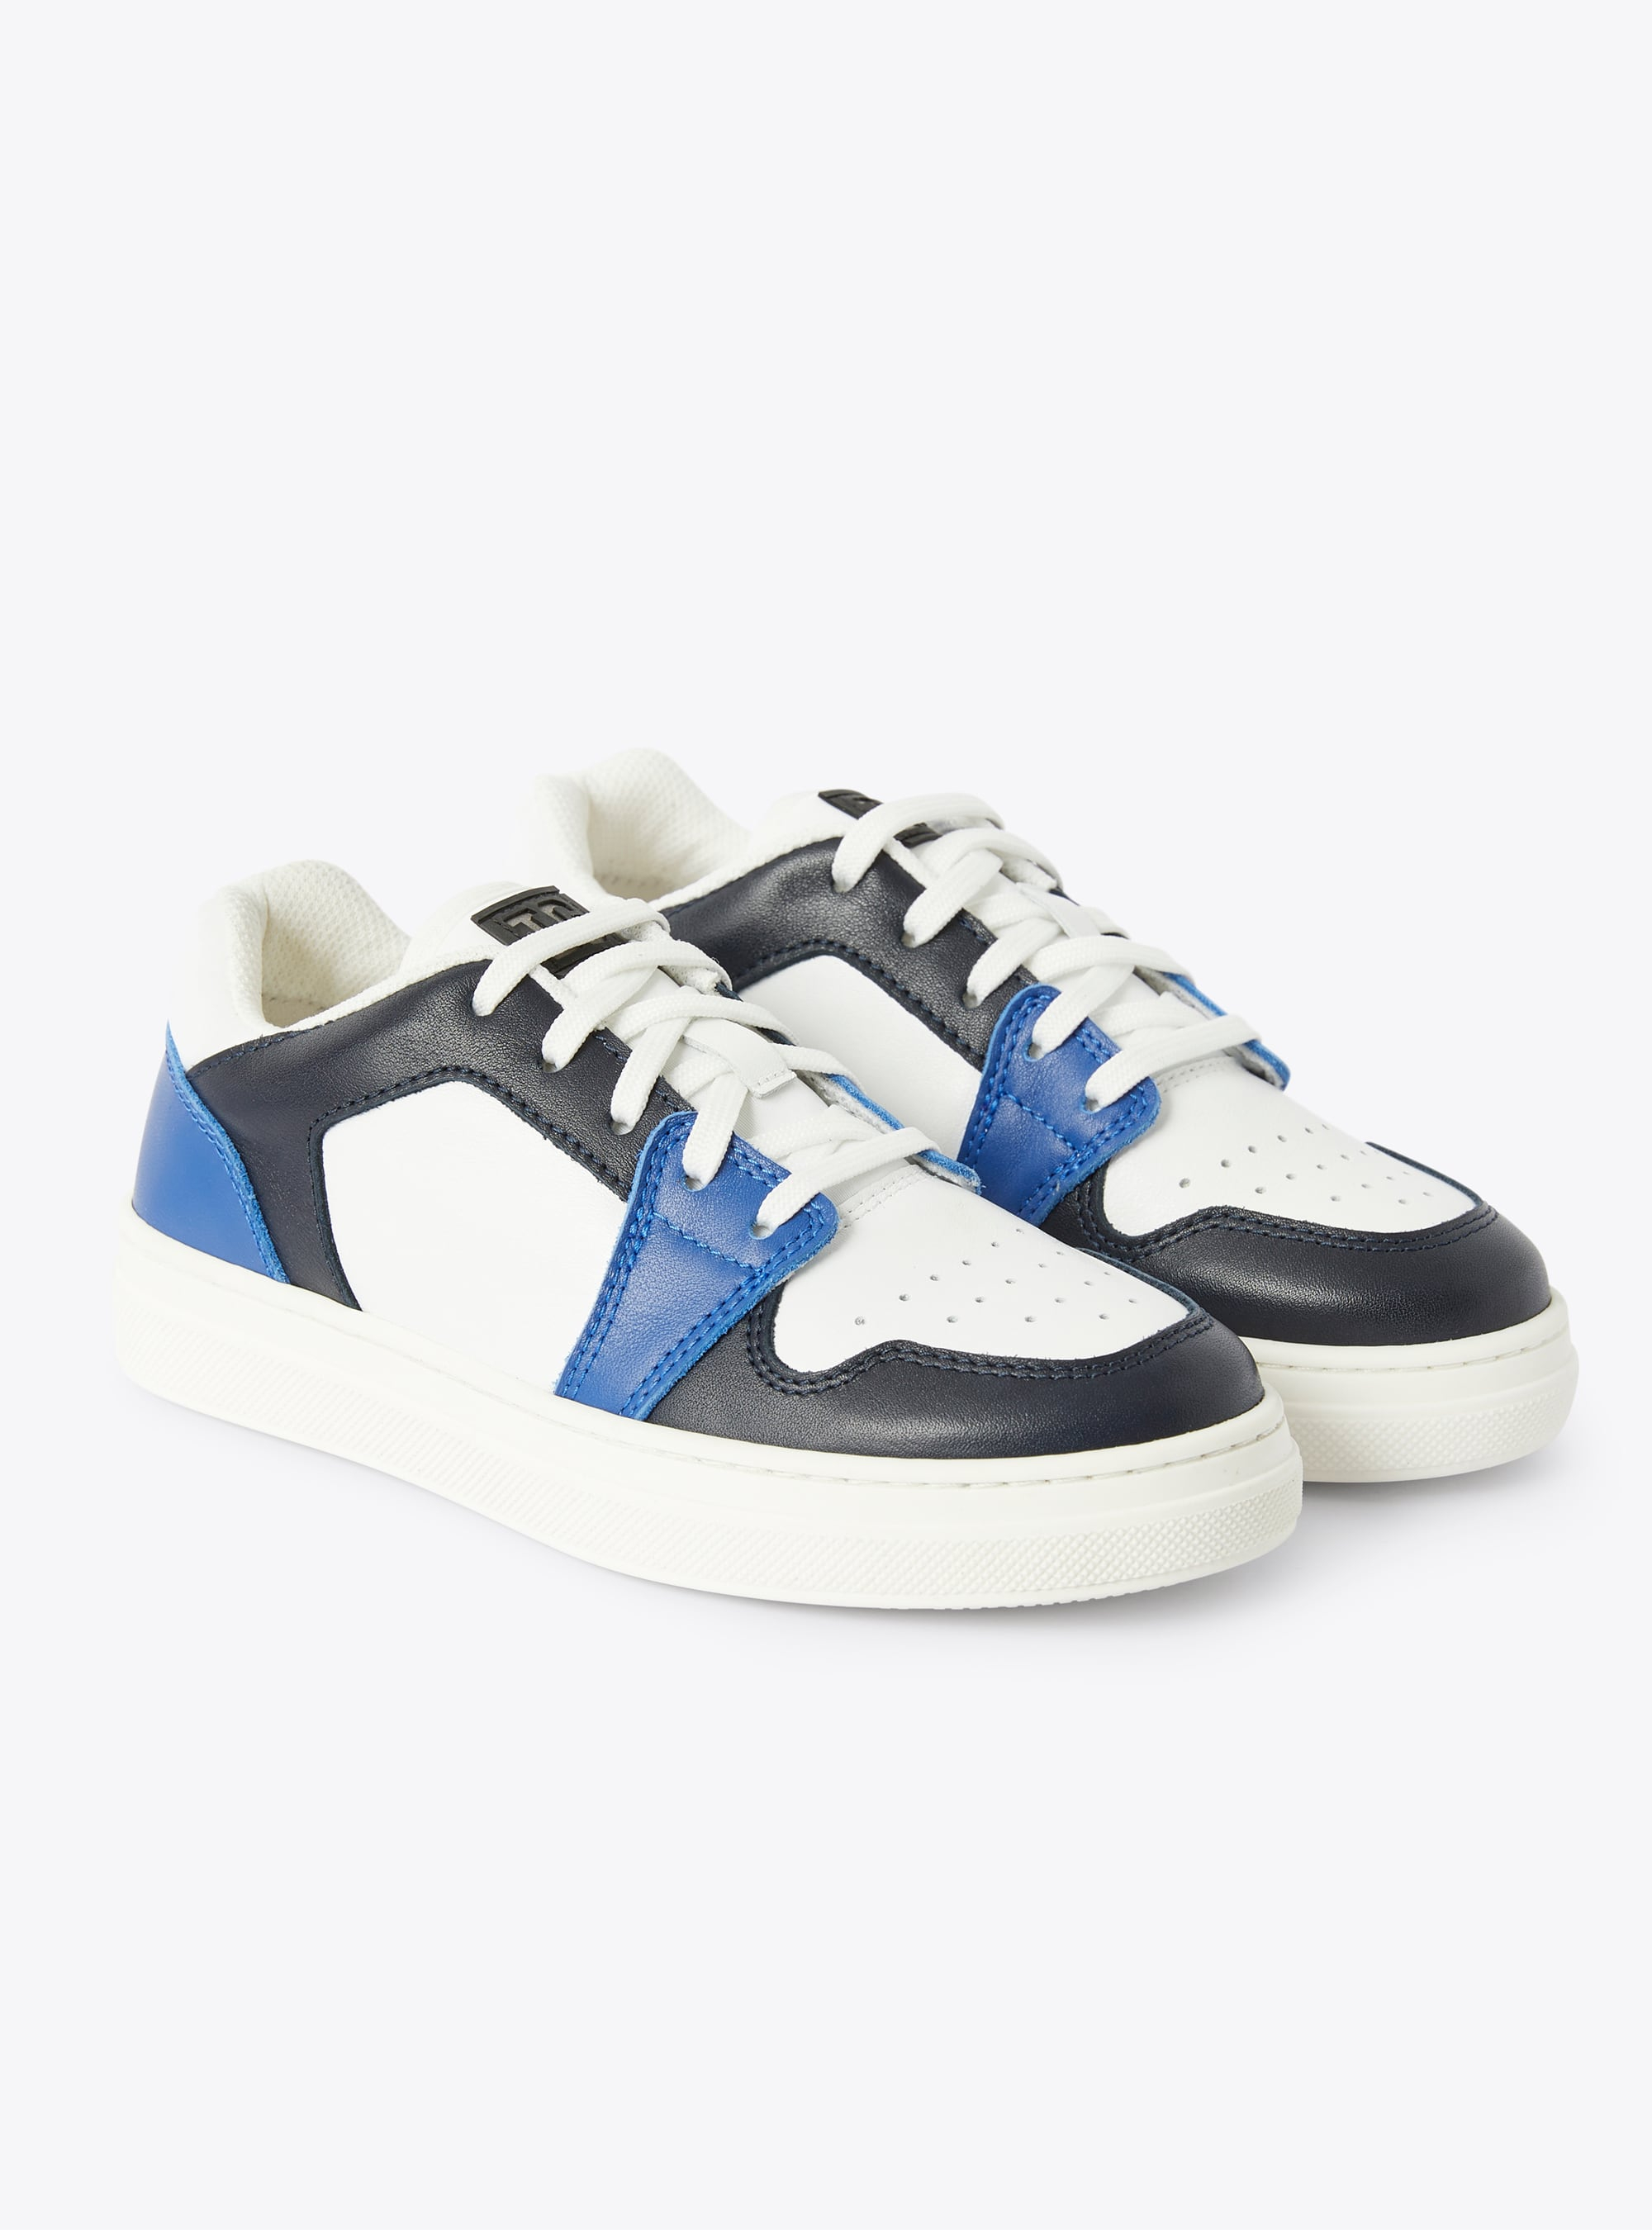 Low-top two-tone IG sneaker in cobalt and dark blue - Shoes - Il Gufo